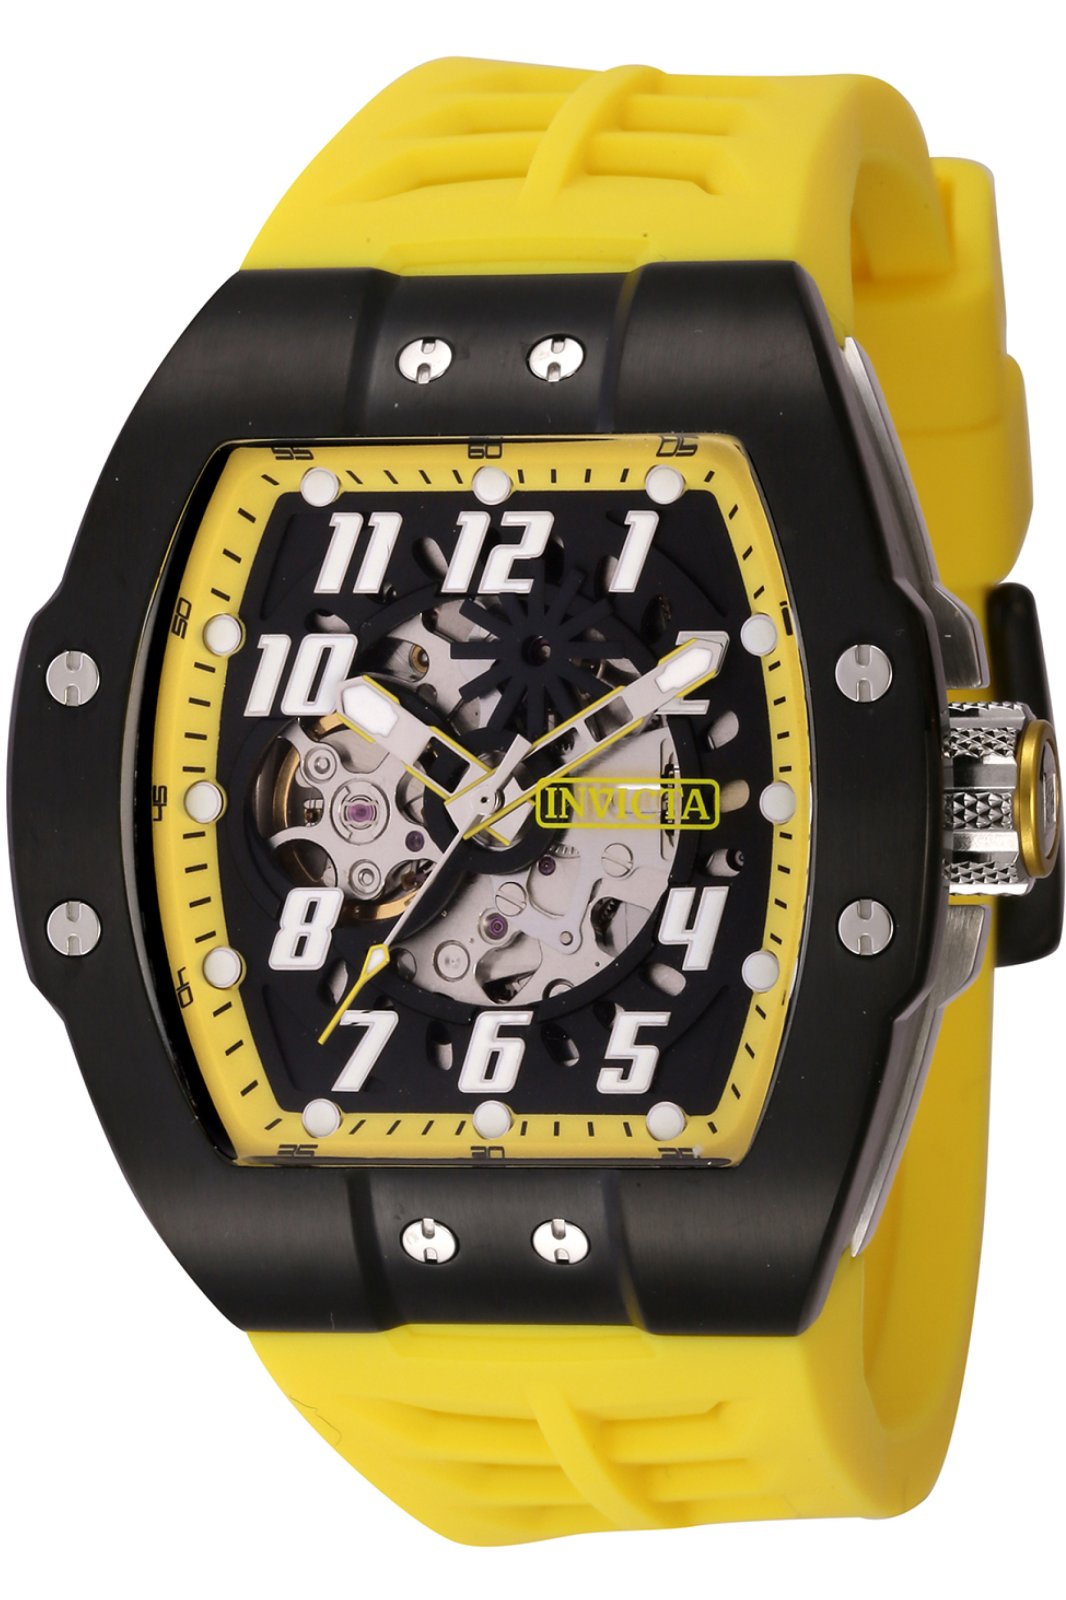 Invicta S1 Rally 44893 Men's Automatic Watch - 44mm